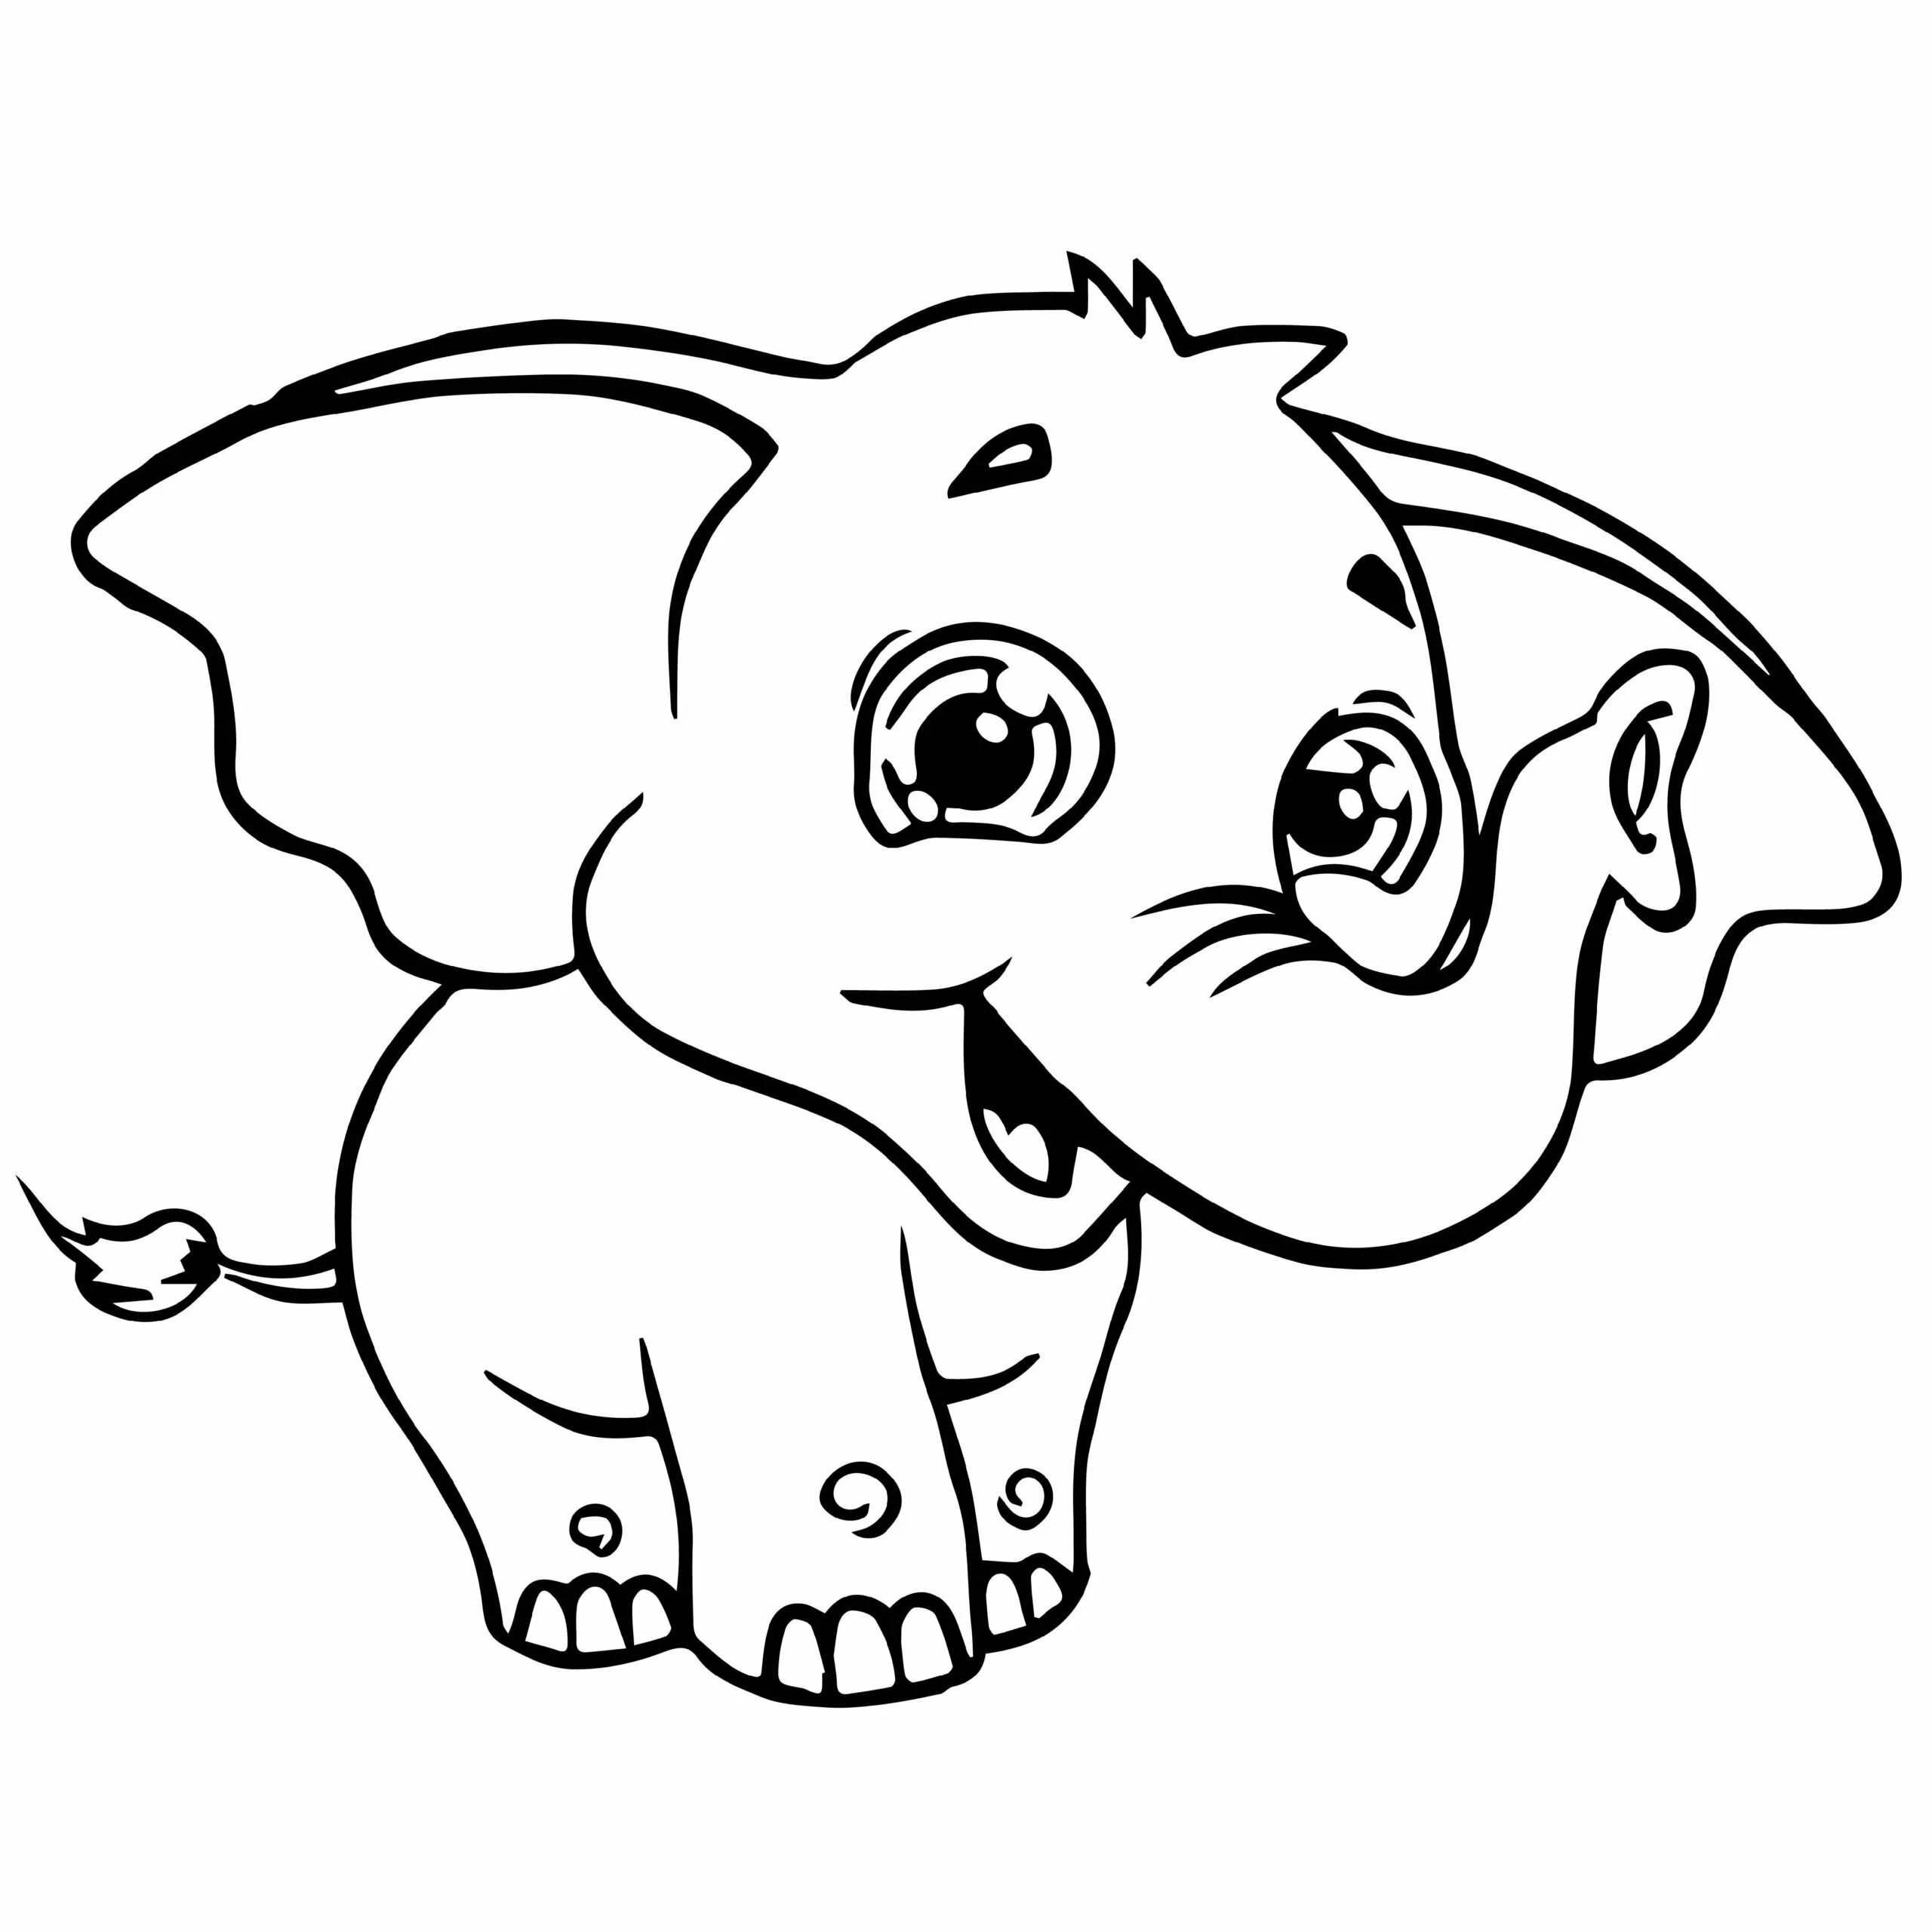 Generous elephant coloring pages for children